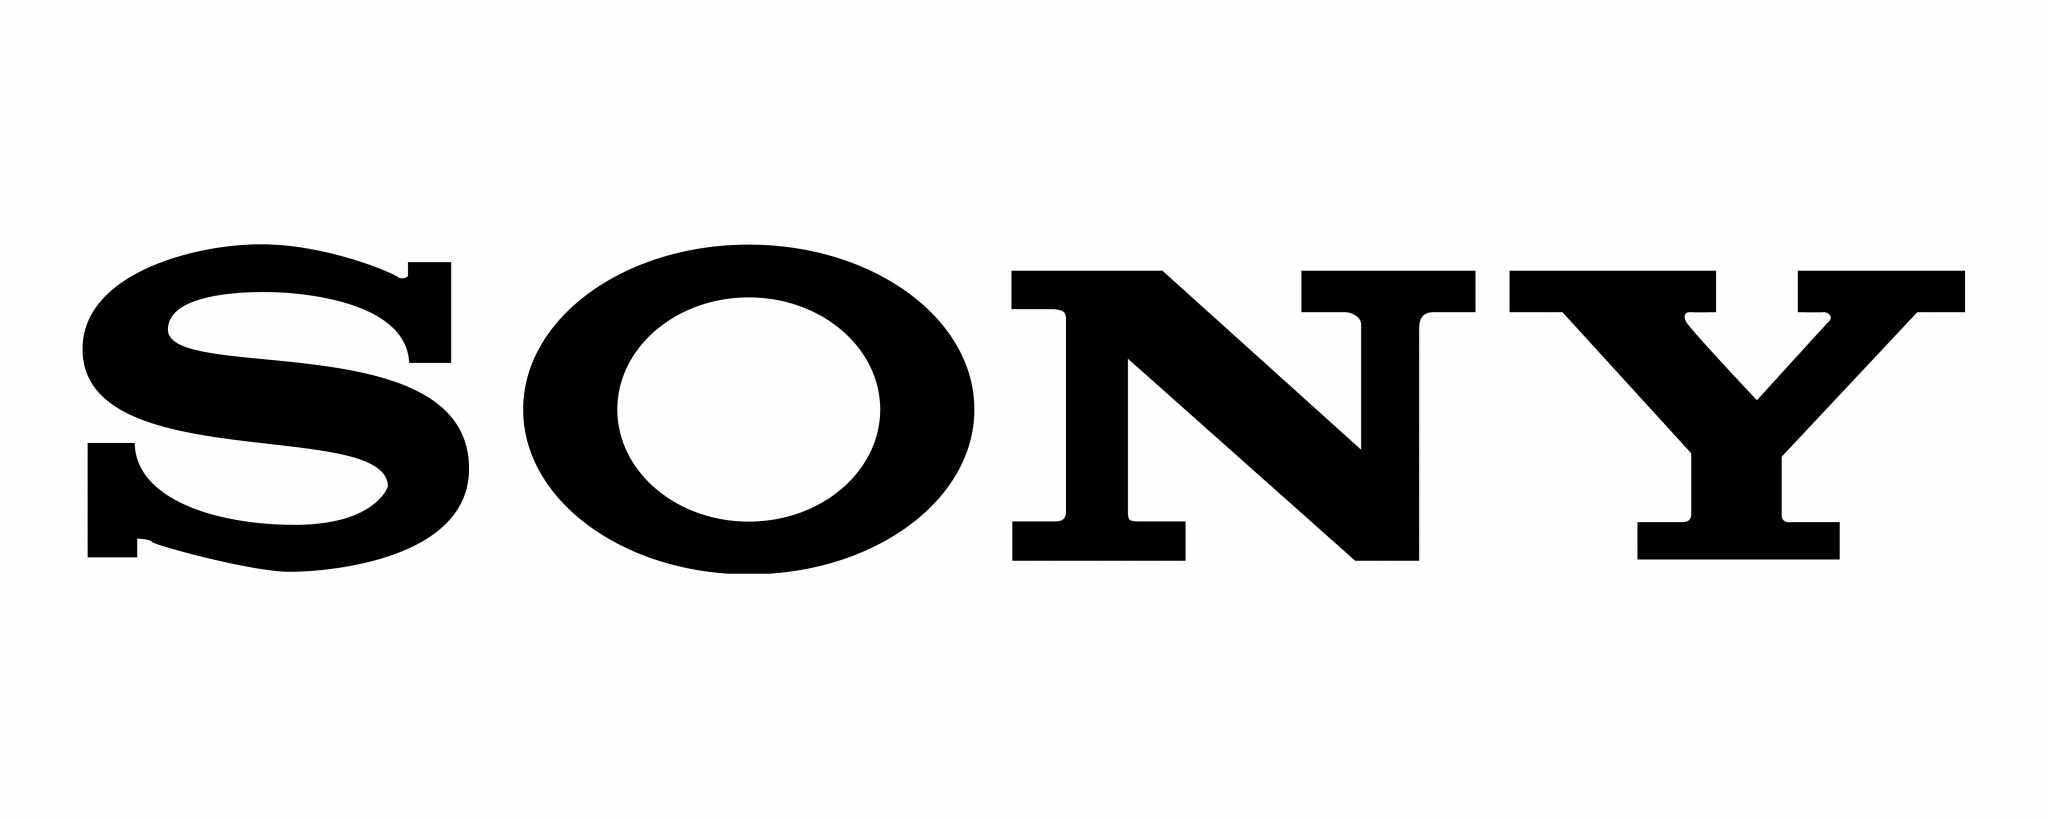 Sony TV Logo - Sony is Considering Selling Xperia Mobile and Bravia TV Businesses ...